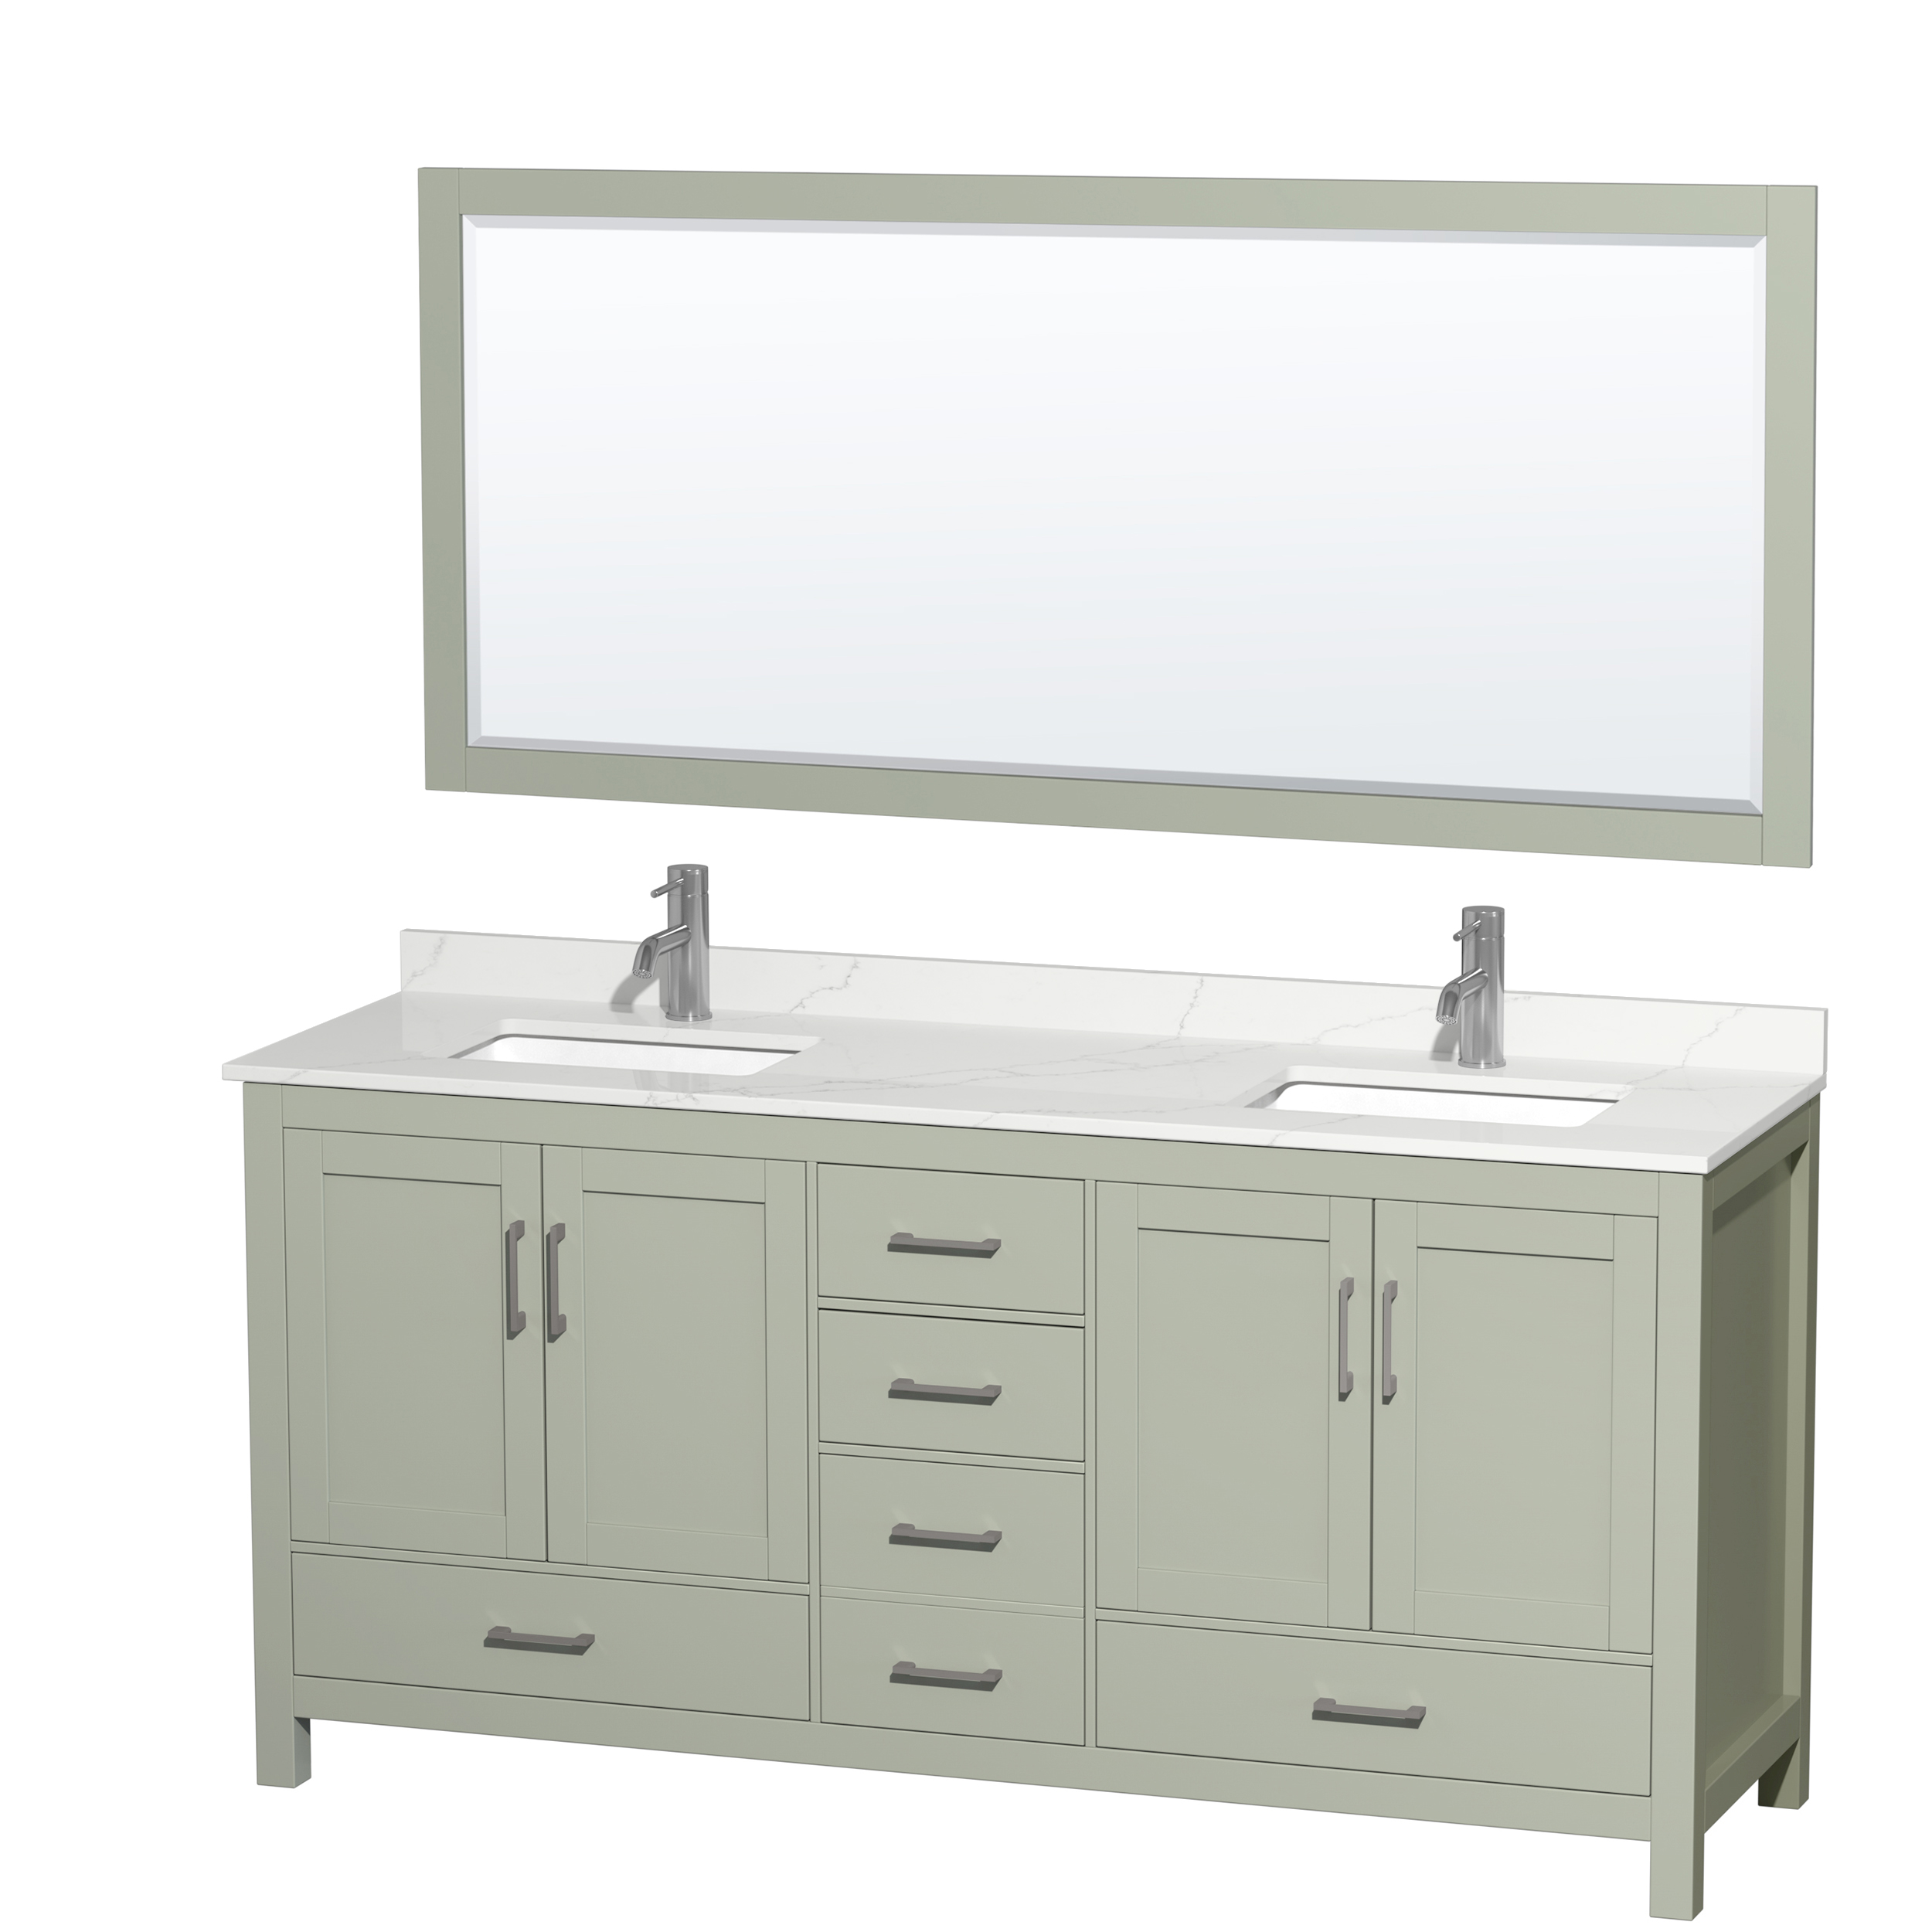 Sheffield 72" Double Bathroom Vanity by Wyndham Collection - Light Green WC-1414-72-DBL-VAN-LGN